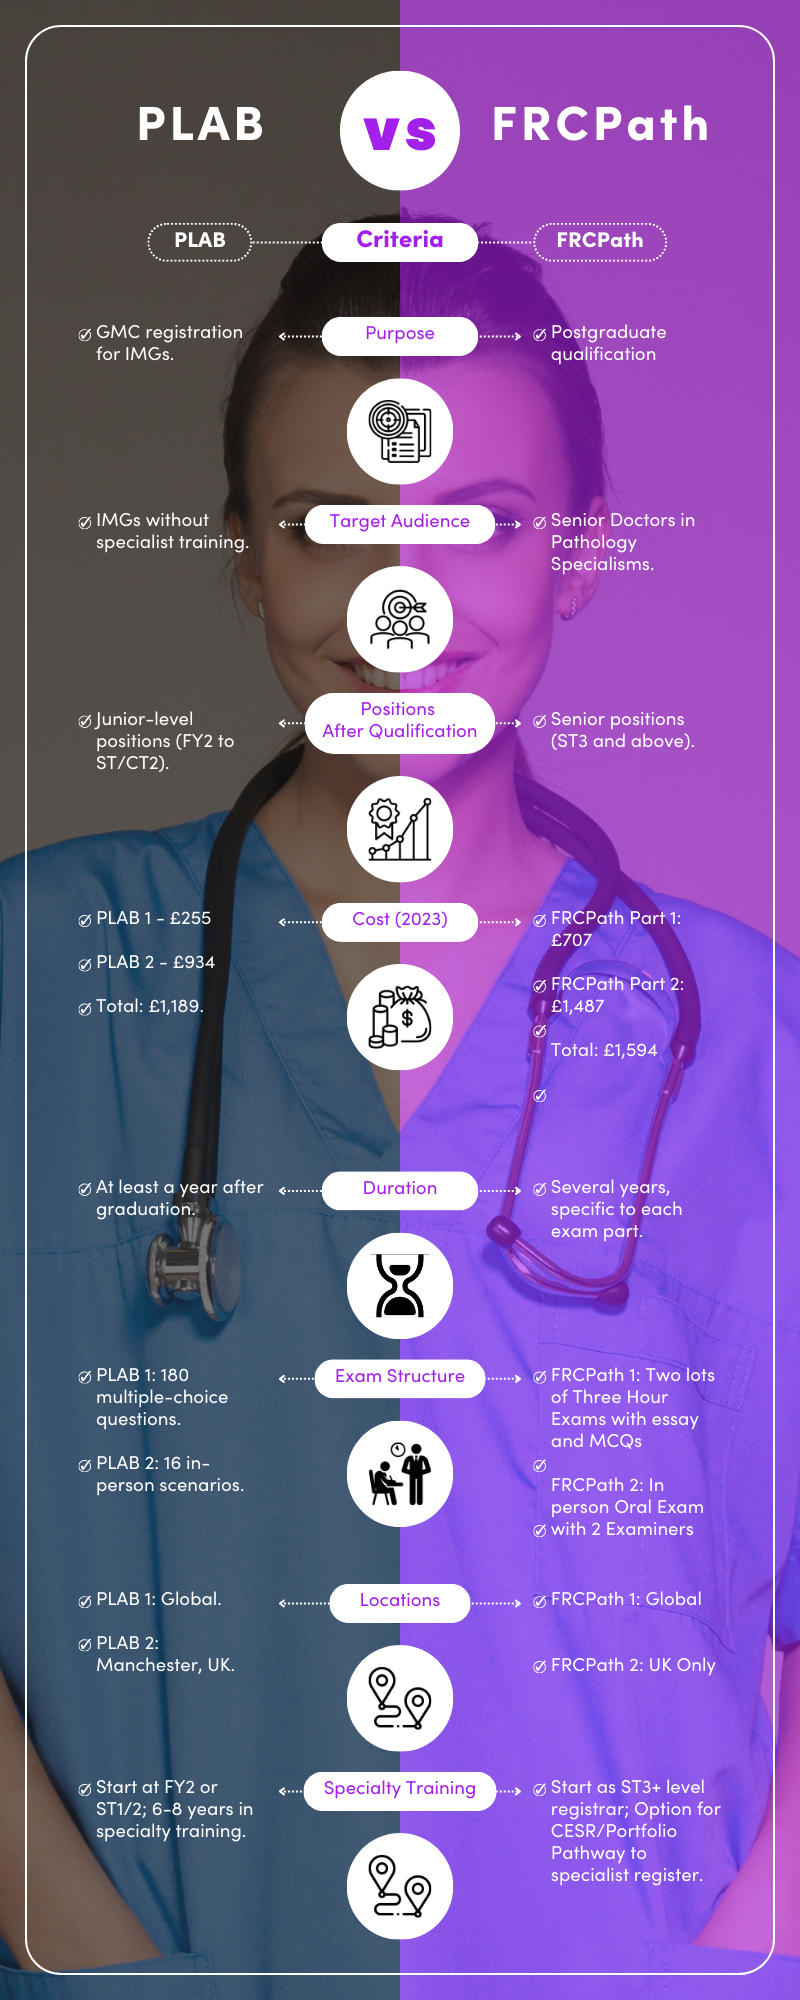 Infographic containing the various criteria that separate PLAB and FRCPath as options for IMG doctors looking to pursue a career in the NHS